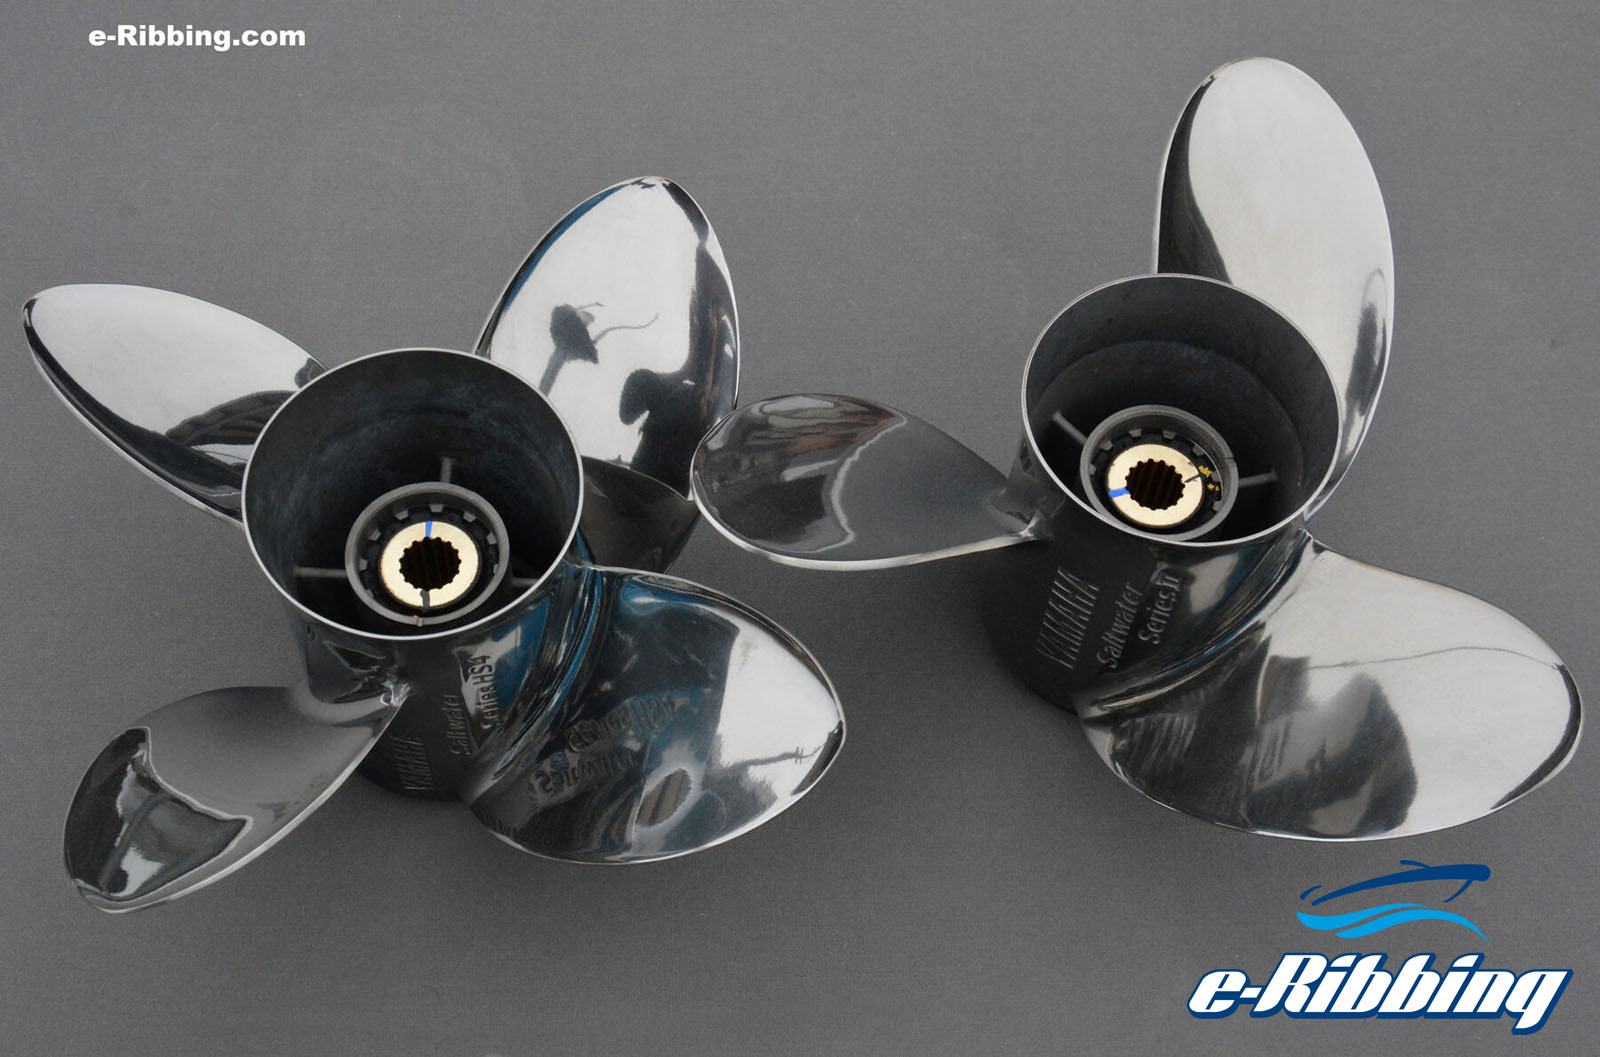 Testing the HS4 4-blade and the Saltwater Series II 3-blade Yamaha’s propellers